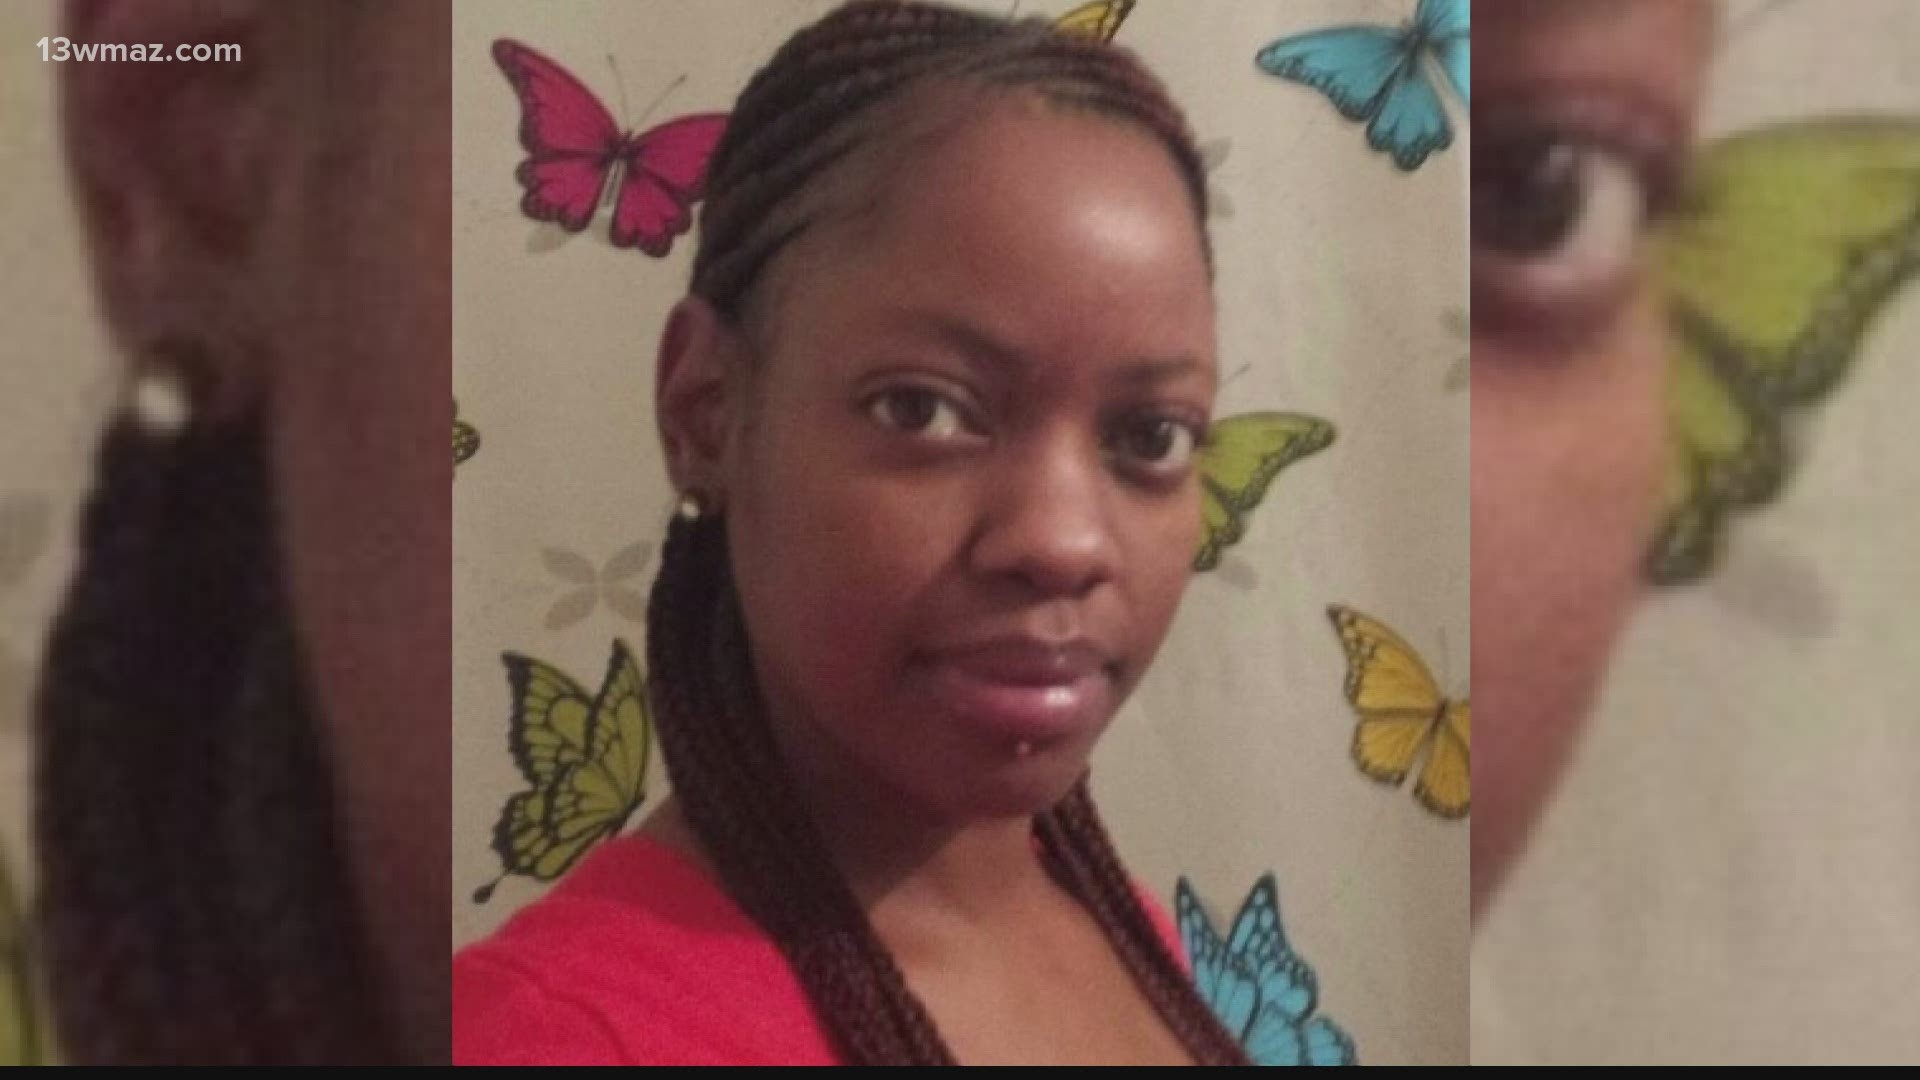 The woman was taken to the Medical Center, Atrium Health Navicent where she later died. She was identified as 35-year-old Myeisha Veronica Glenn.